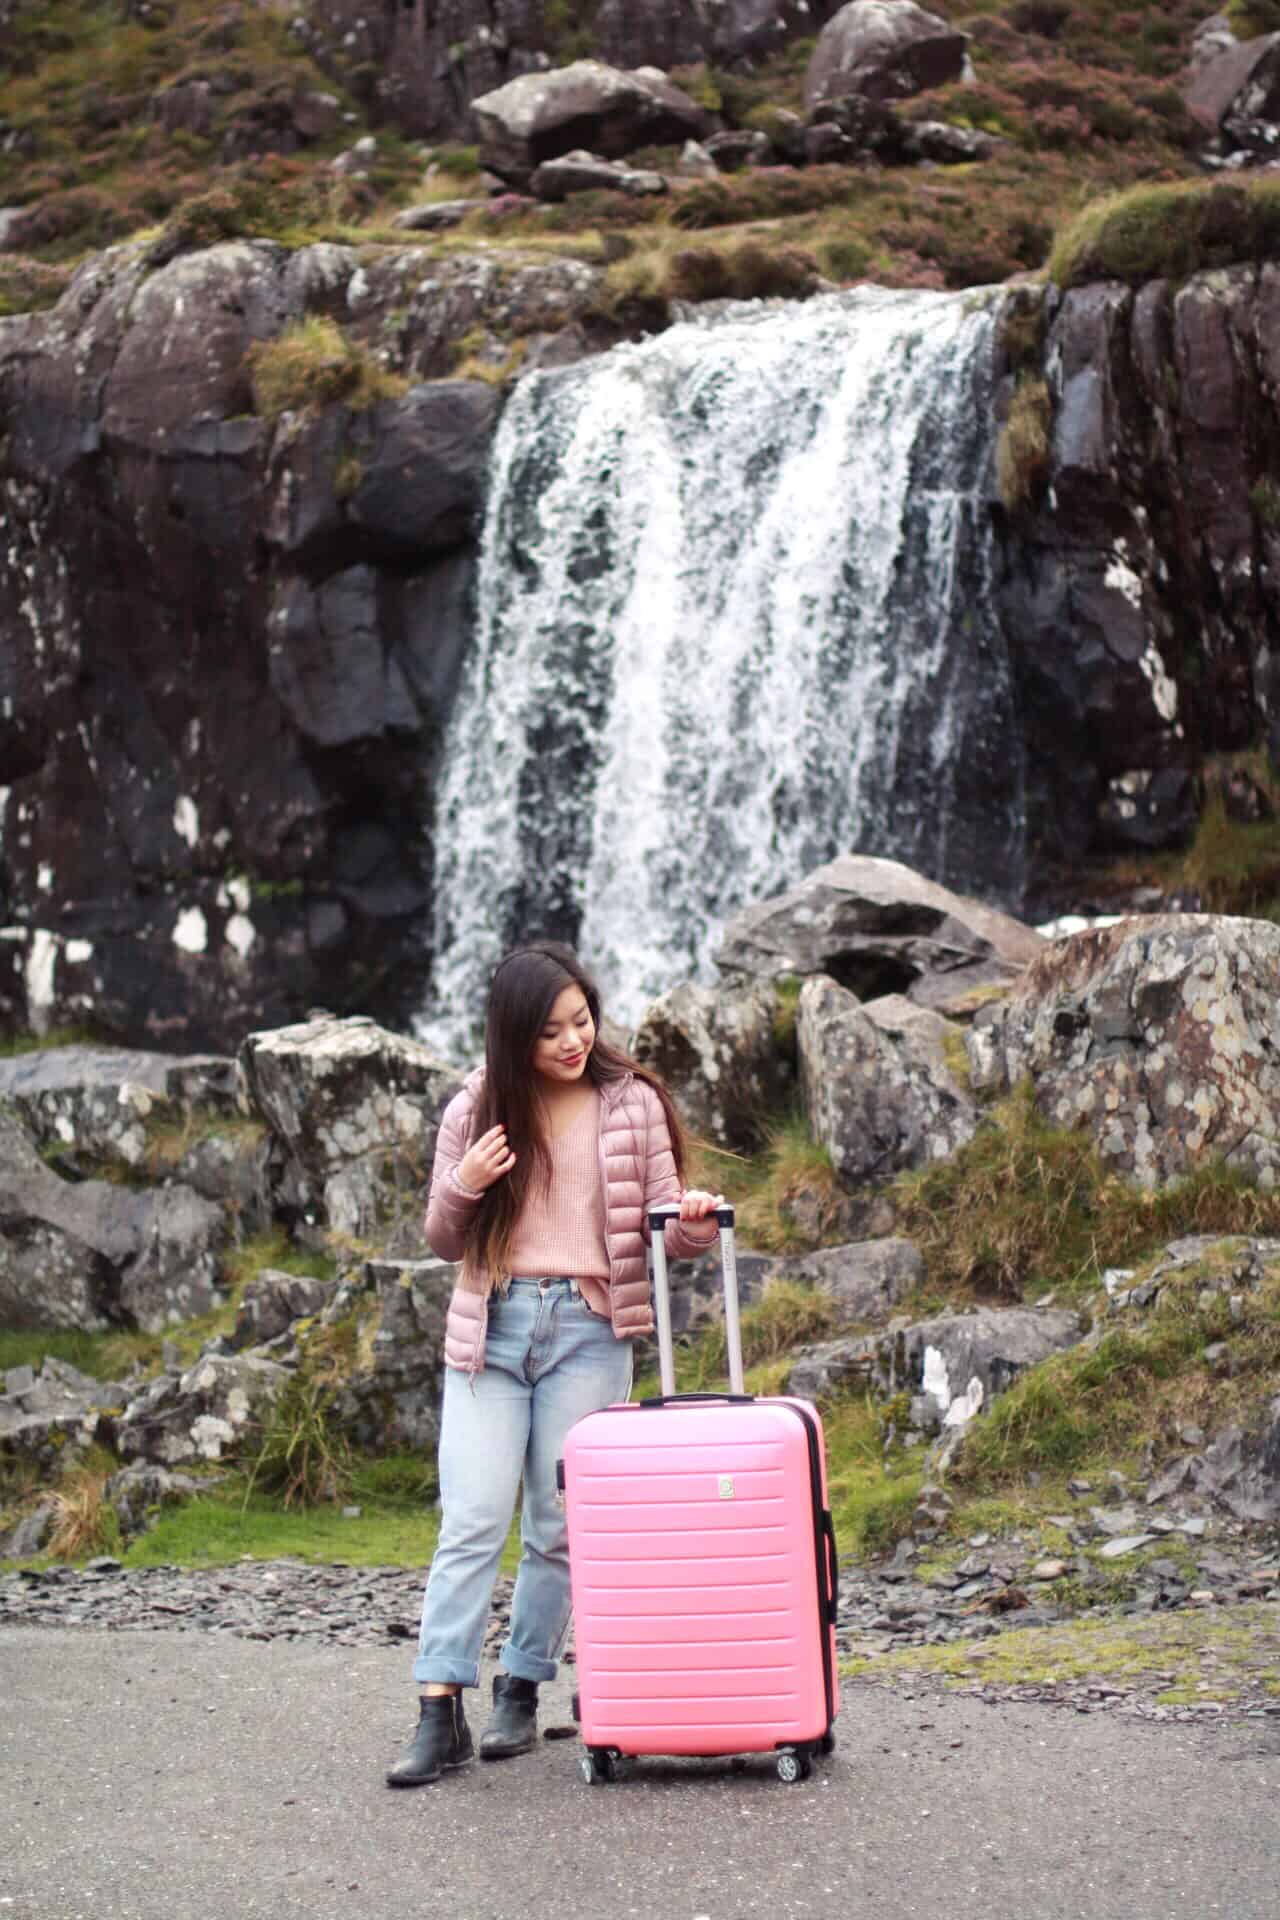 Travel essentials for women to pack in a carry-on luggage | Waterfall in Ireland